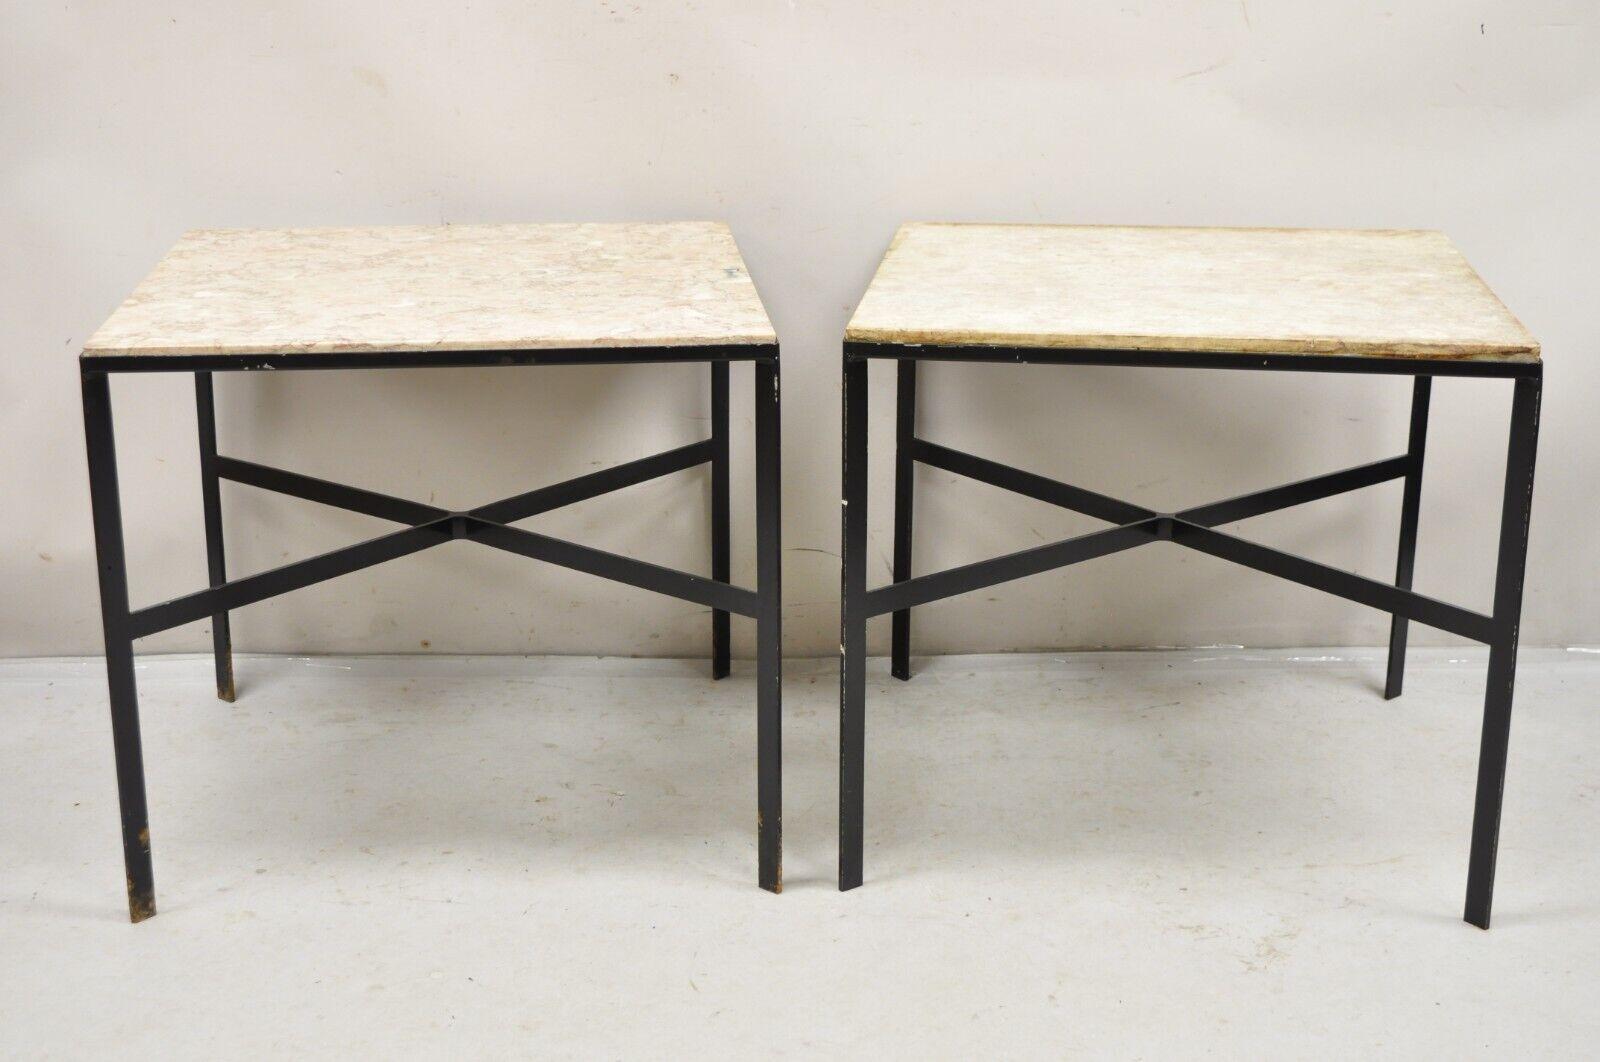 Vintage Paul McCobb Style Wrought Iron and Marble Square Side Tables - a Pair. Item features square wrought iron black painted frames, sculpted cross stretcher base, sleek flat metal bars, inset marble tops, clean Modernist lines, great style and